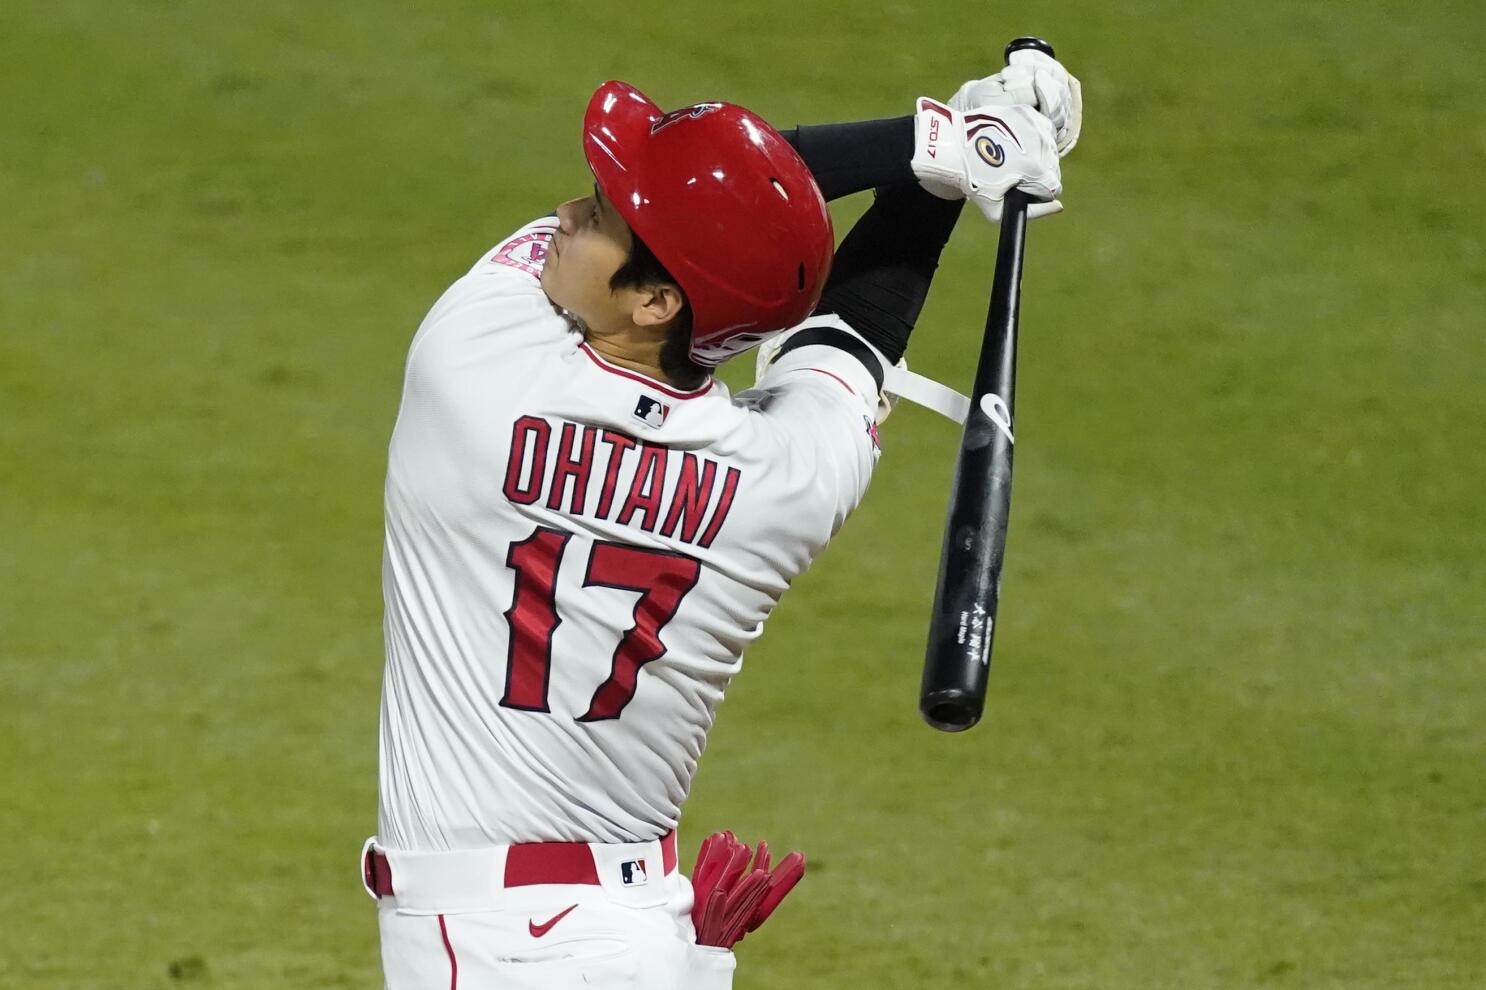 Instant Replay: L.A. Angels' Shohei Ohtani Hits 100th Home Run